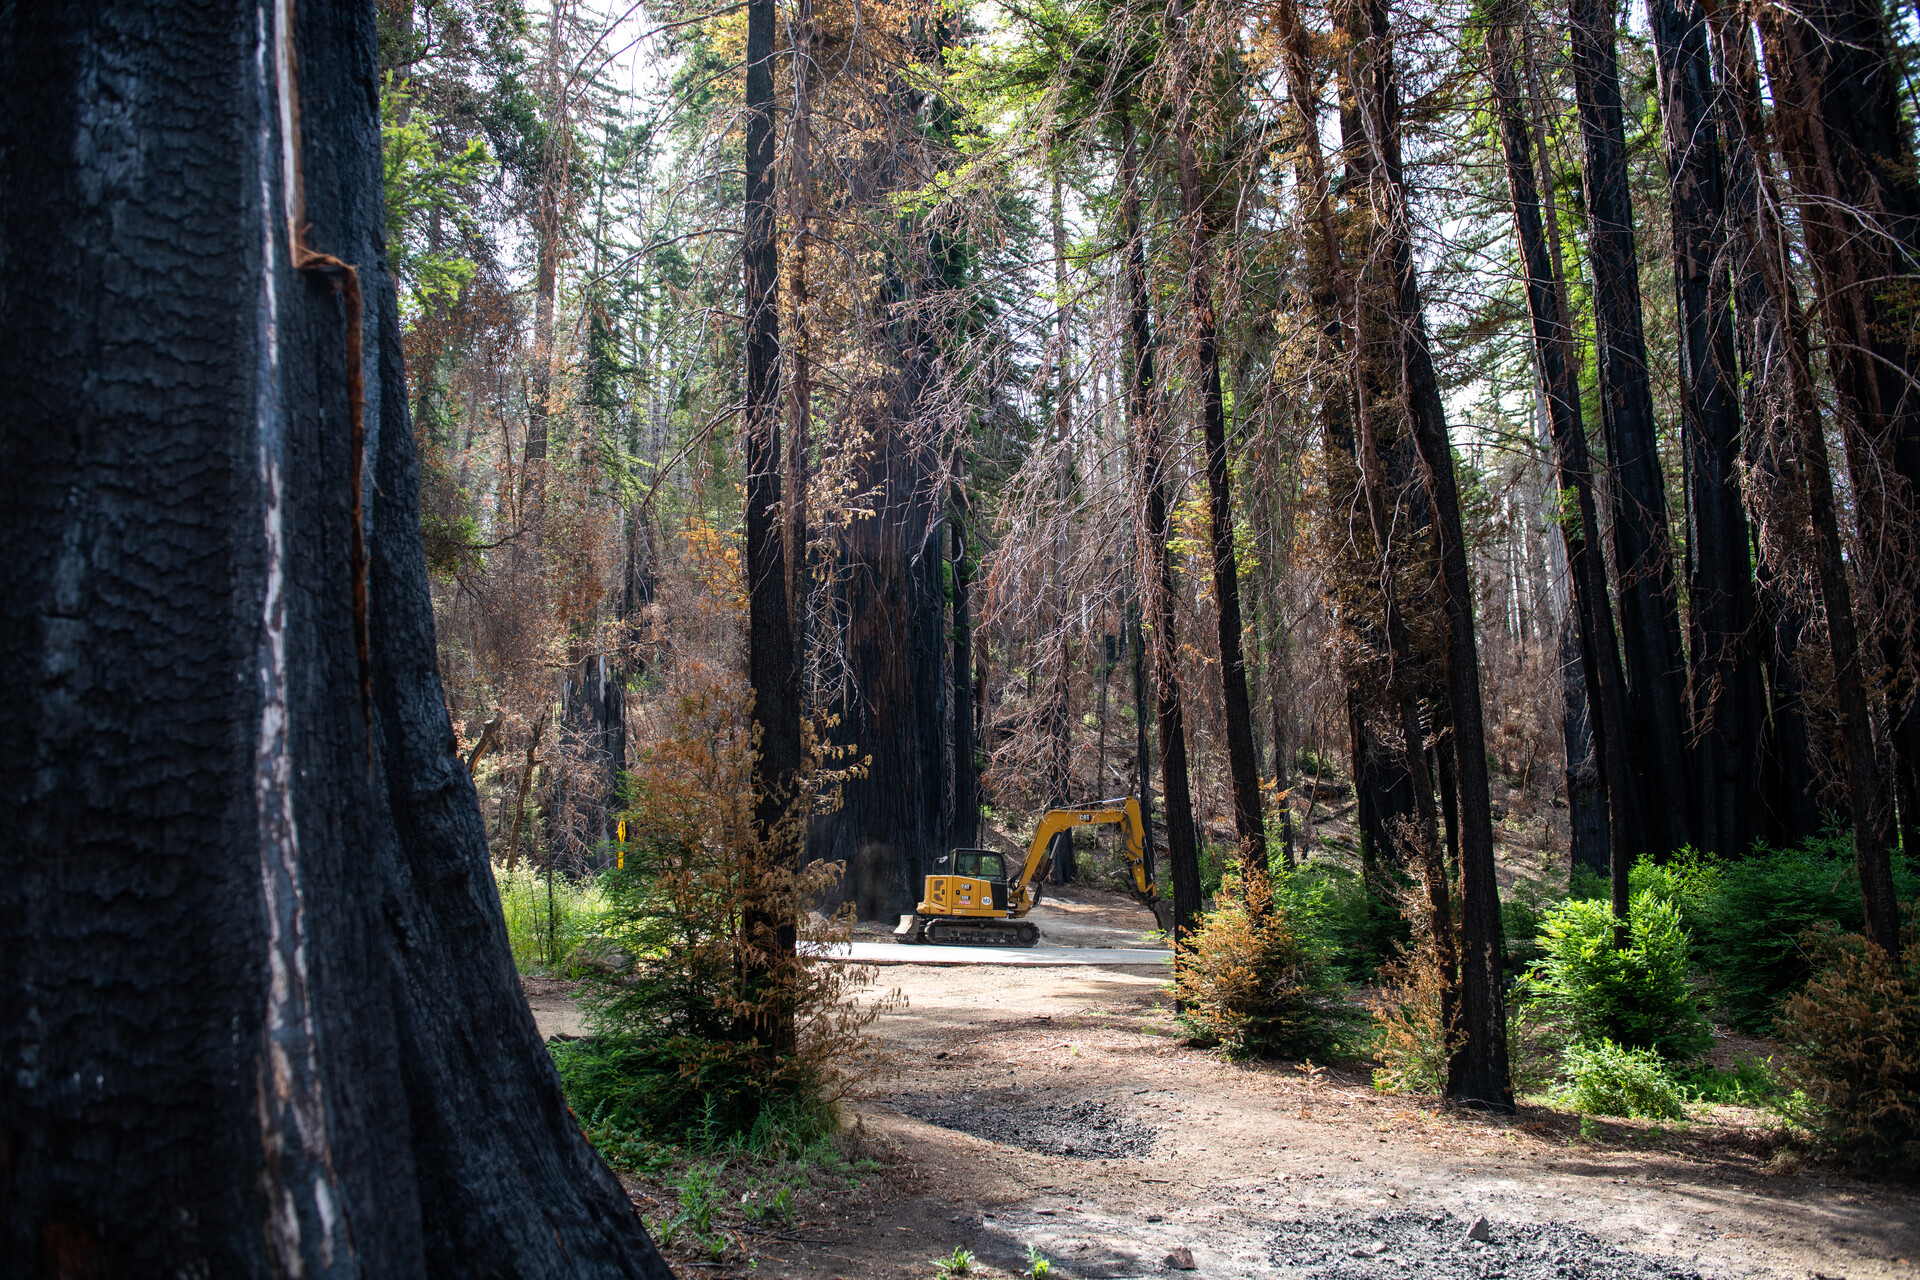 A bright yellow digger performs cleanup in Big Basin in the middle of a redwood grove, where blackened tree trunks have bright green foliage growing off them.